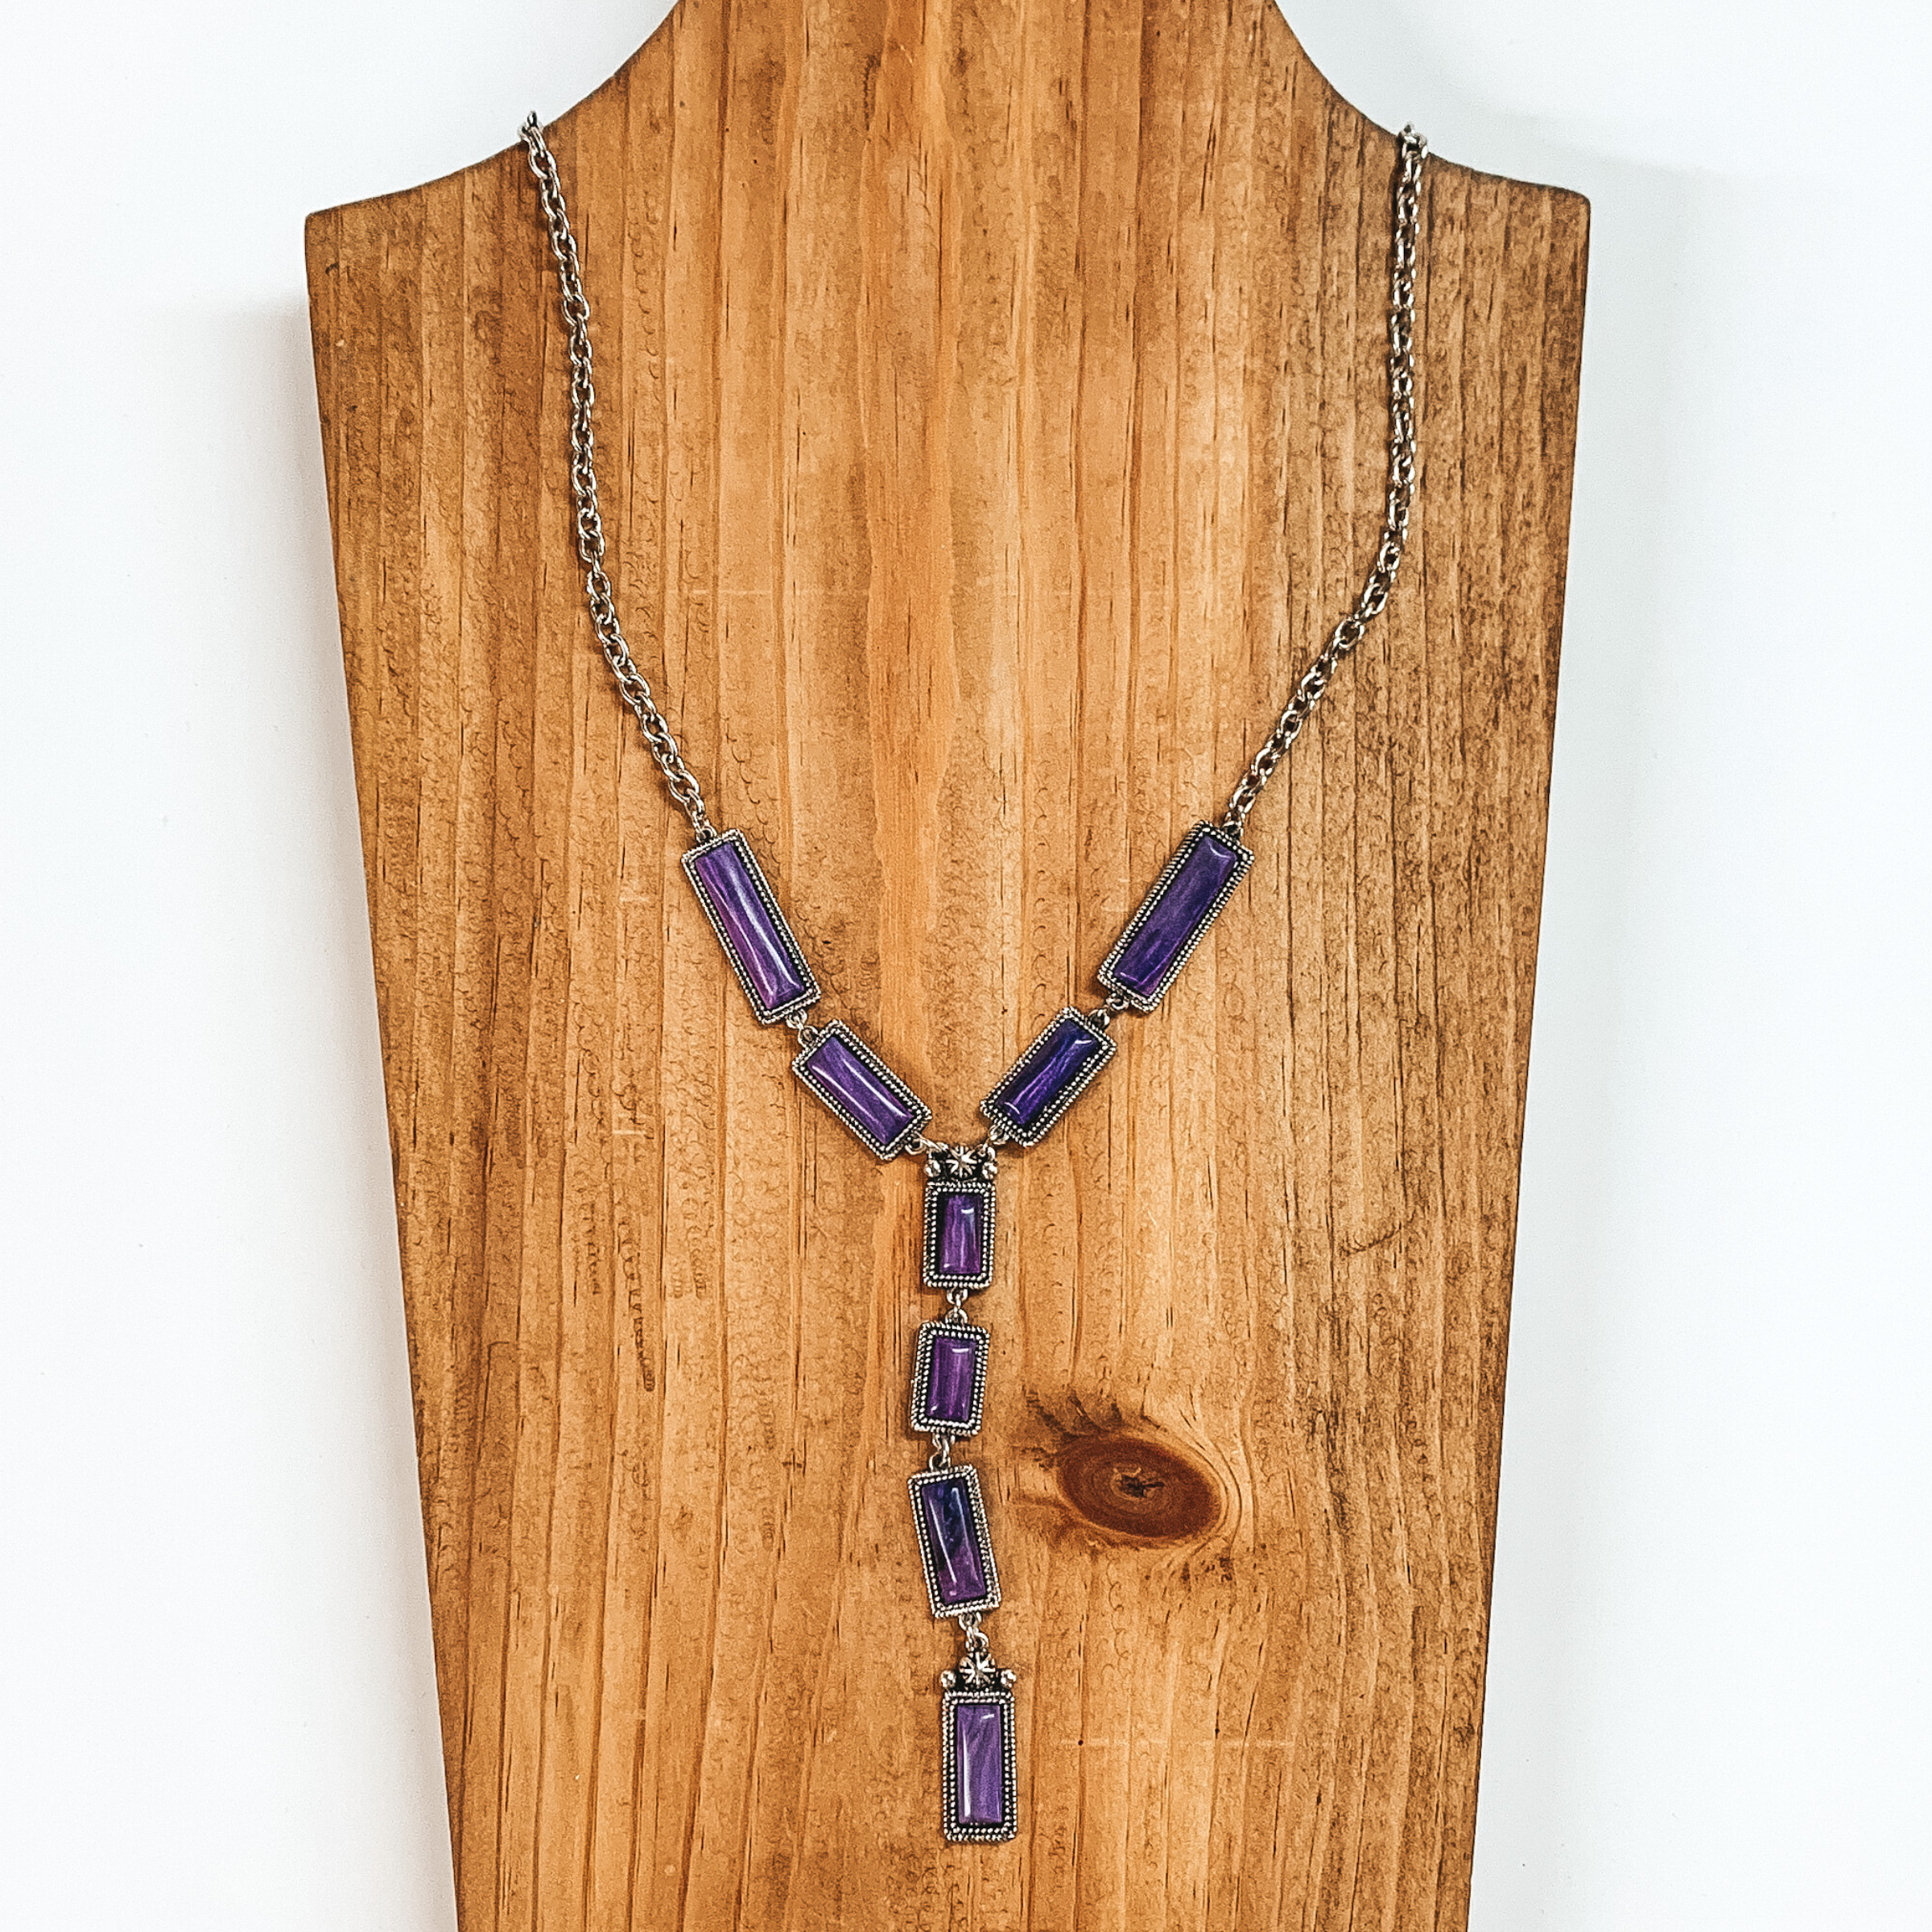 Silver Tone Lariat Necklace with Faux Purple Stones